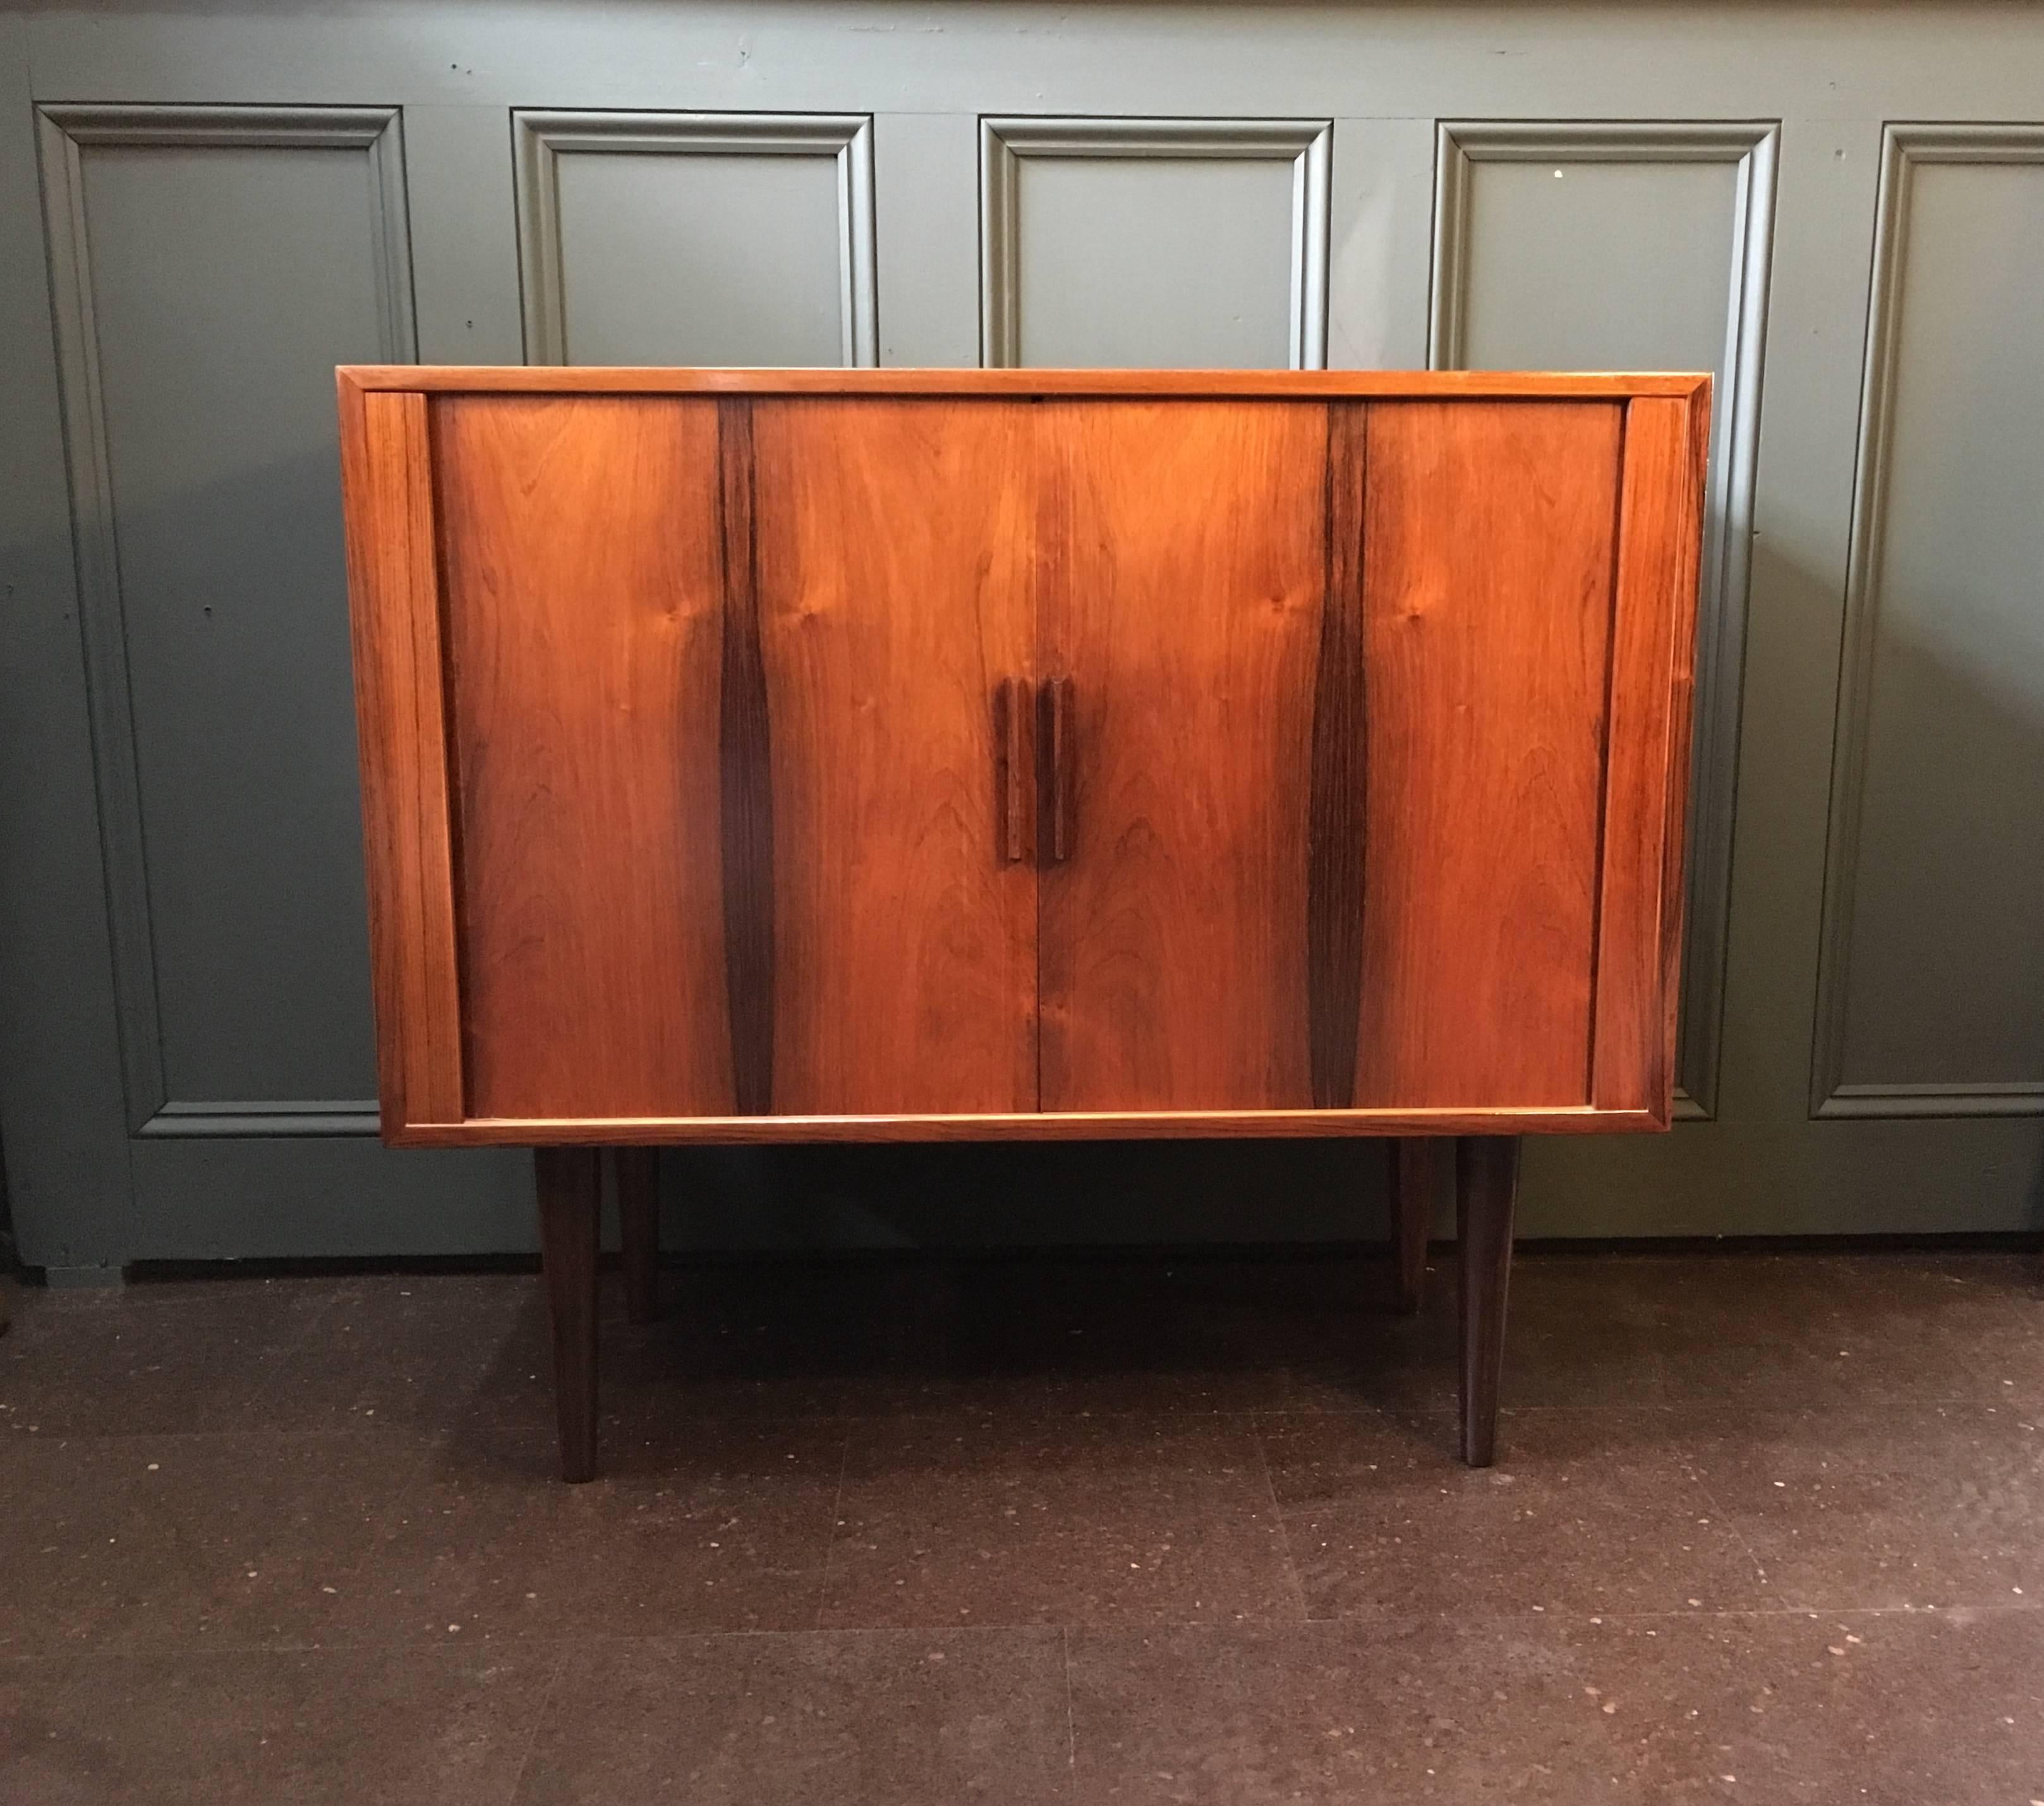 A great mid-size tambour door sideboard by Kai Kristiansen, Denmark, circa 1960.
Adjustable interior shelf with small vinyl rack. Beautifully grained wood. Surface has been refinished.